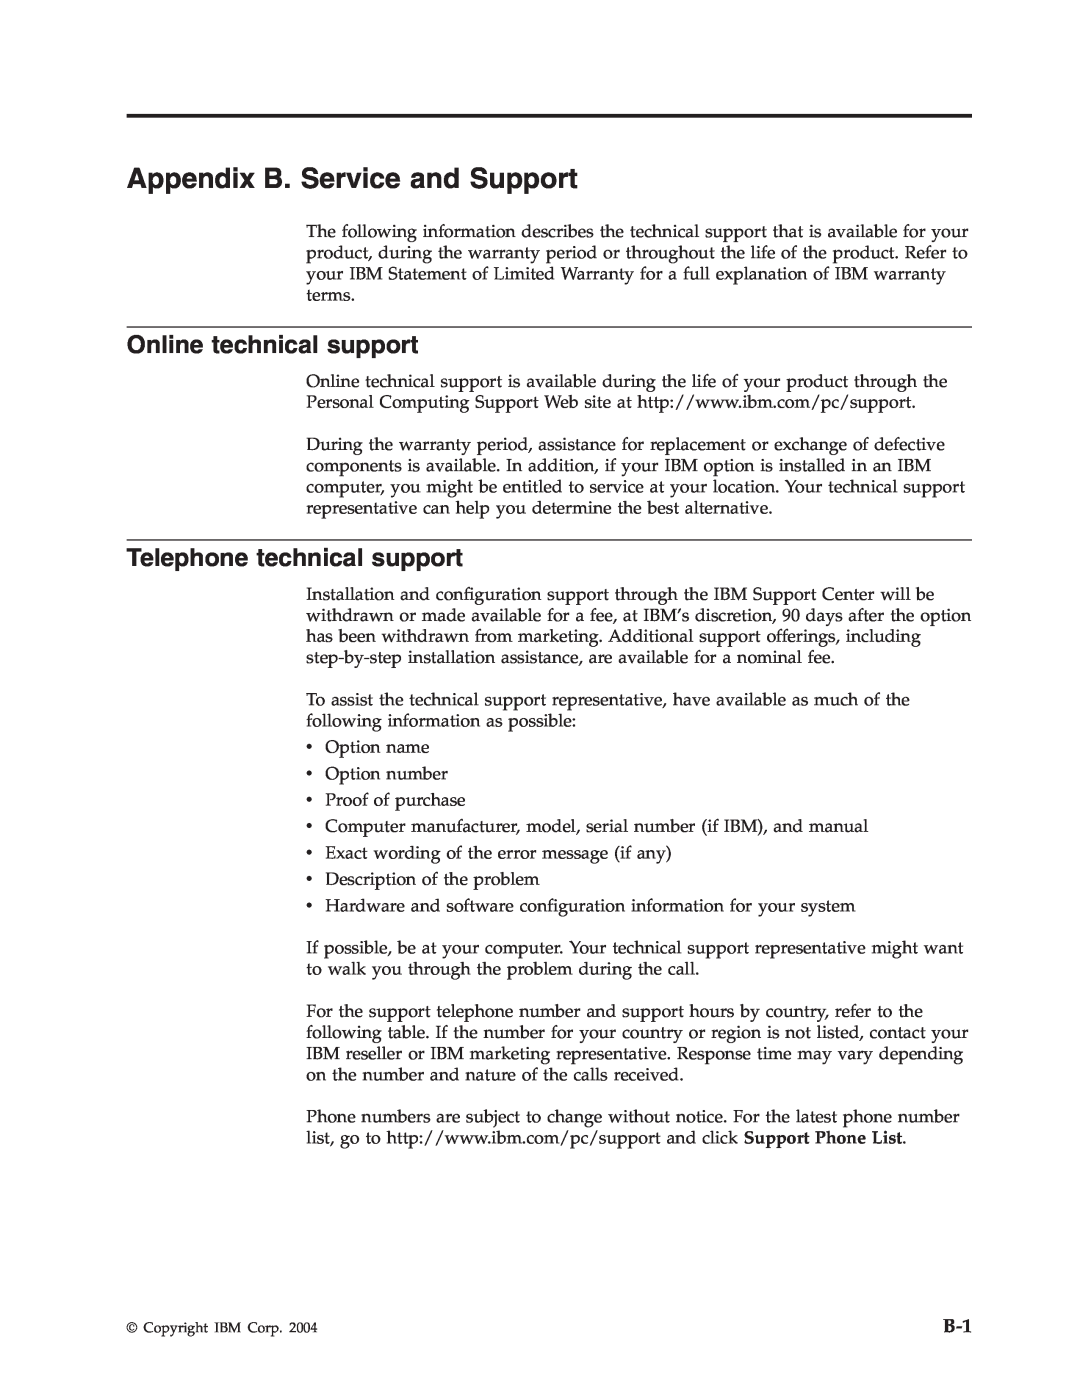 IBM 73P4518 manual Appendix B. Service and Support, Online technical support, Telephone technical support 